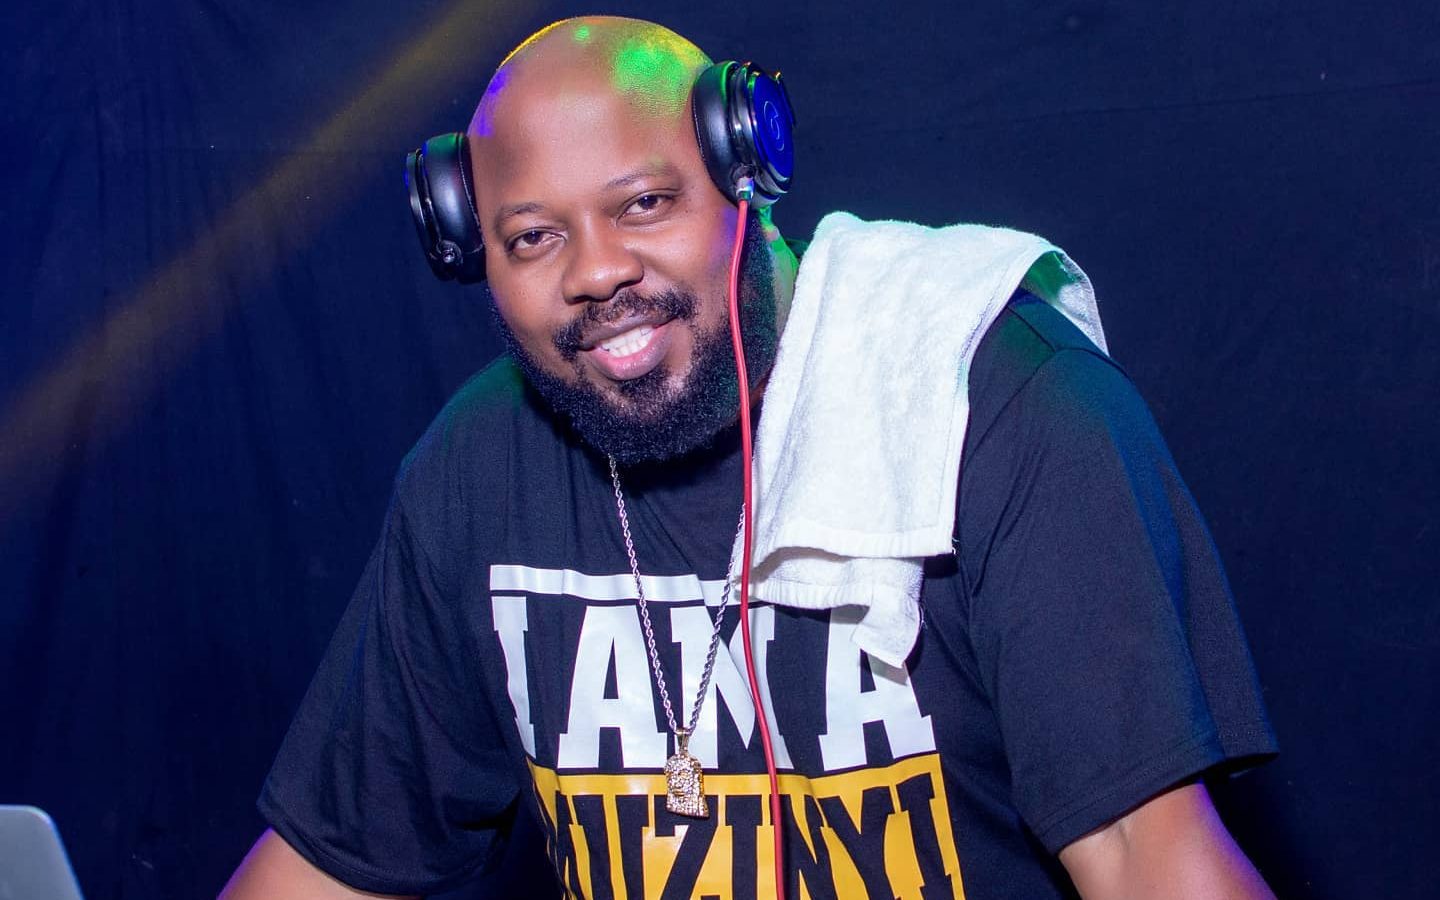 DJ Nimrod likely to face the law over alleged copyright infringement.